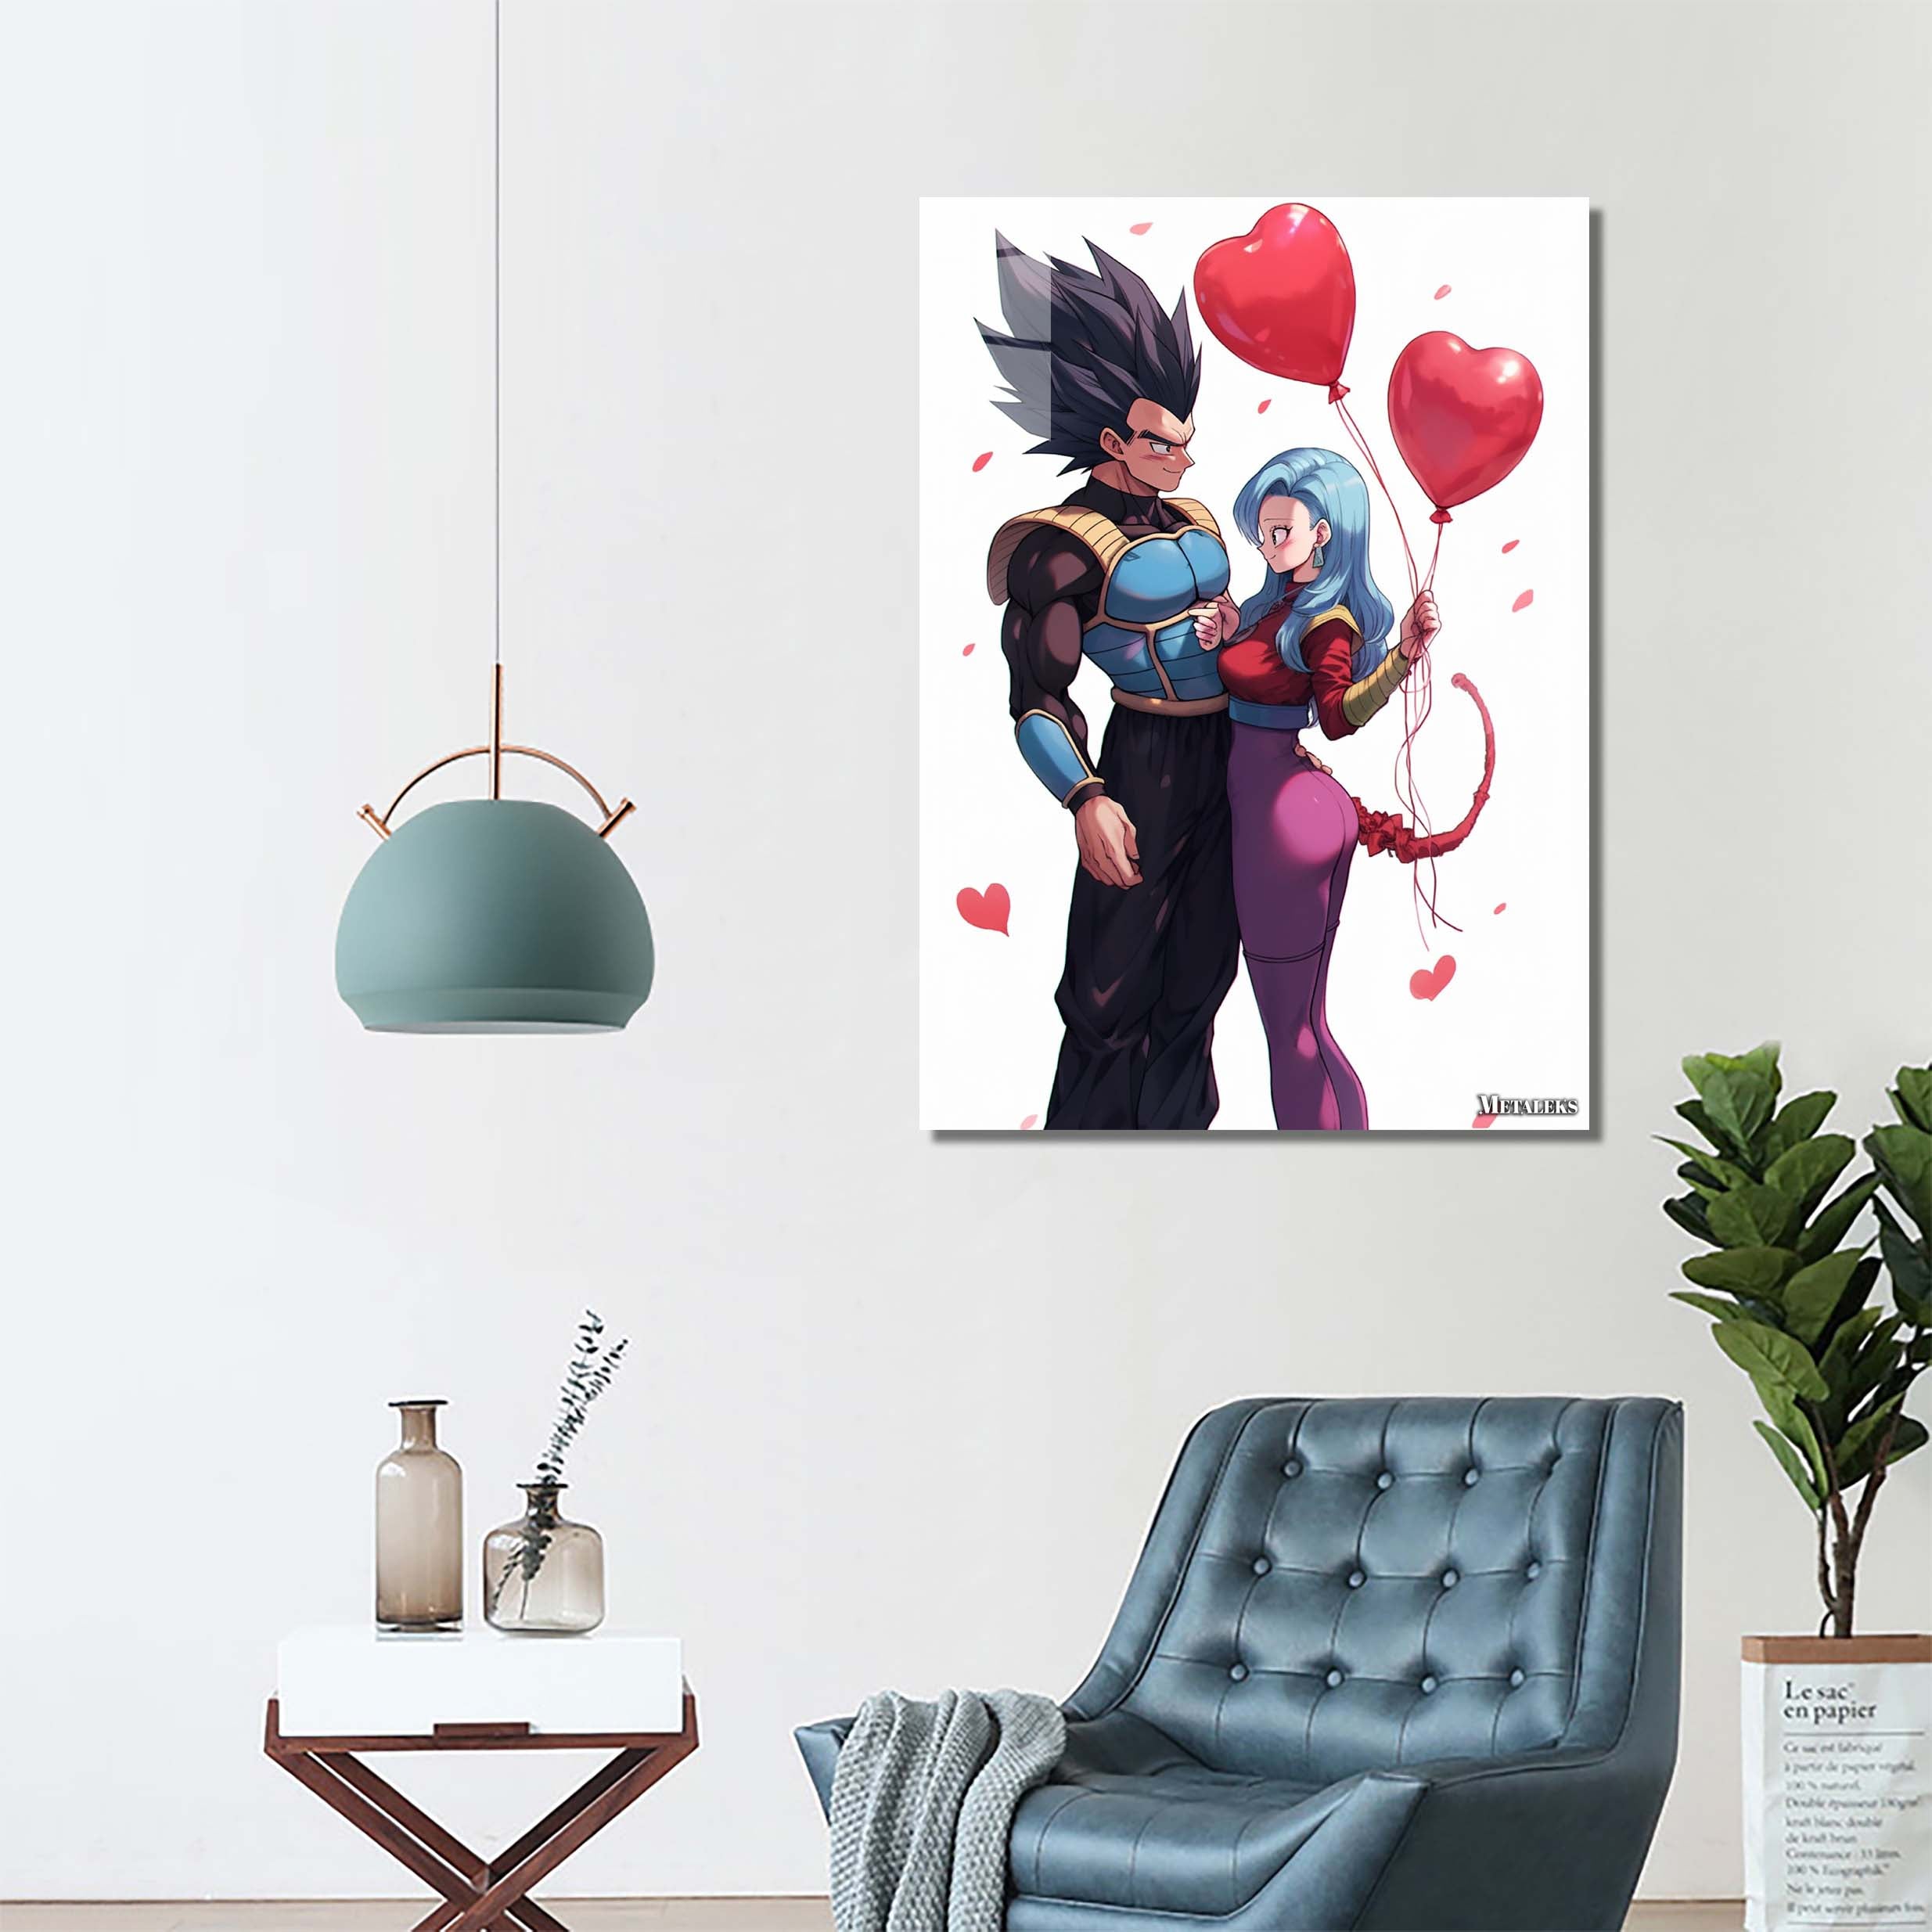 Saiyan Love Chronicles_ Vegeta and Bulma's Epic Journey-designed by @theanimecrossover